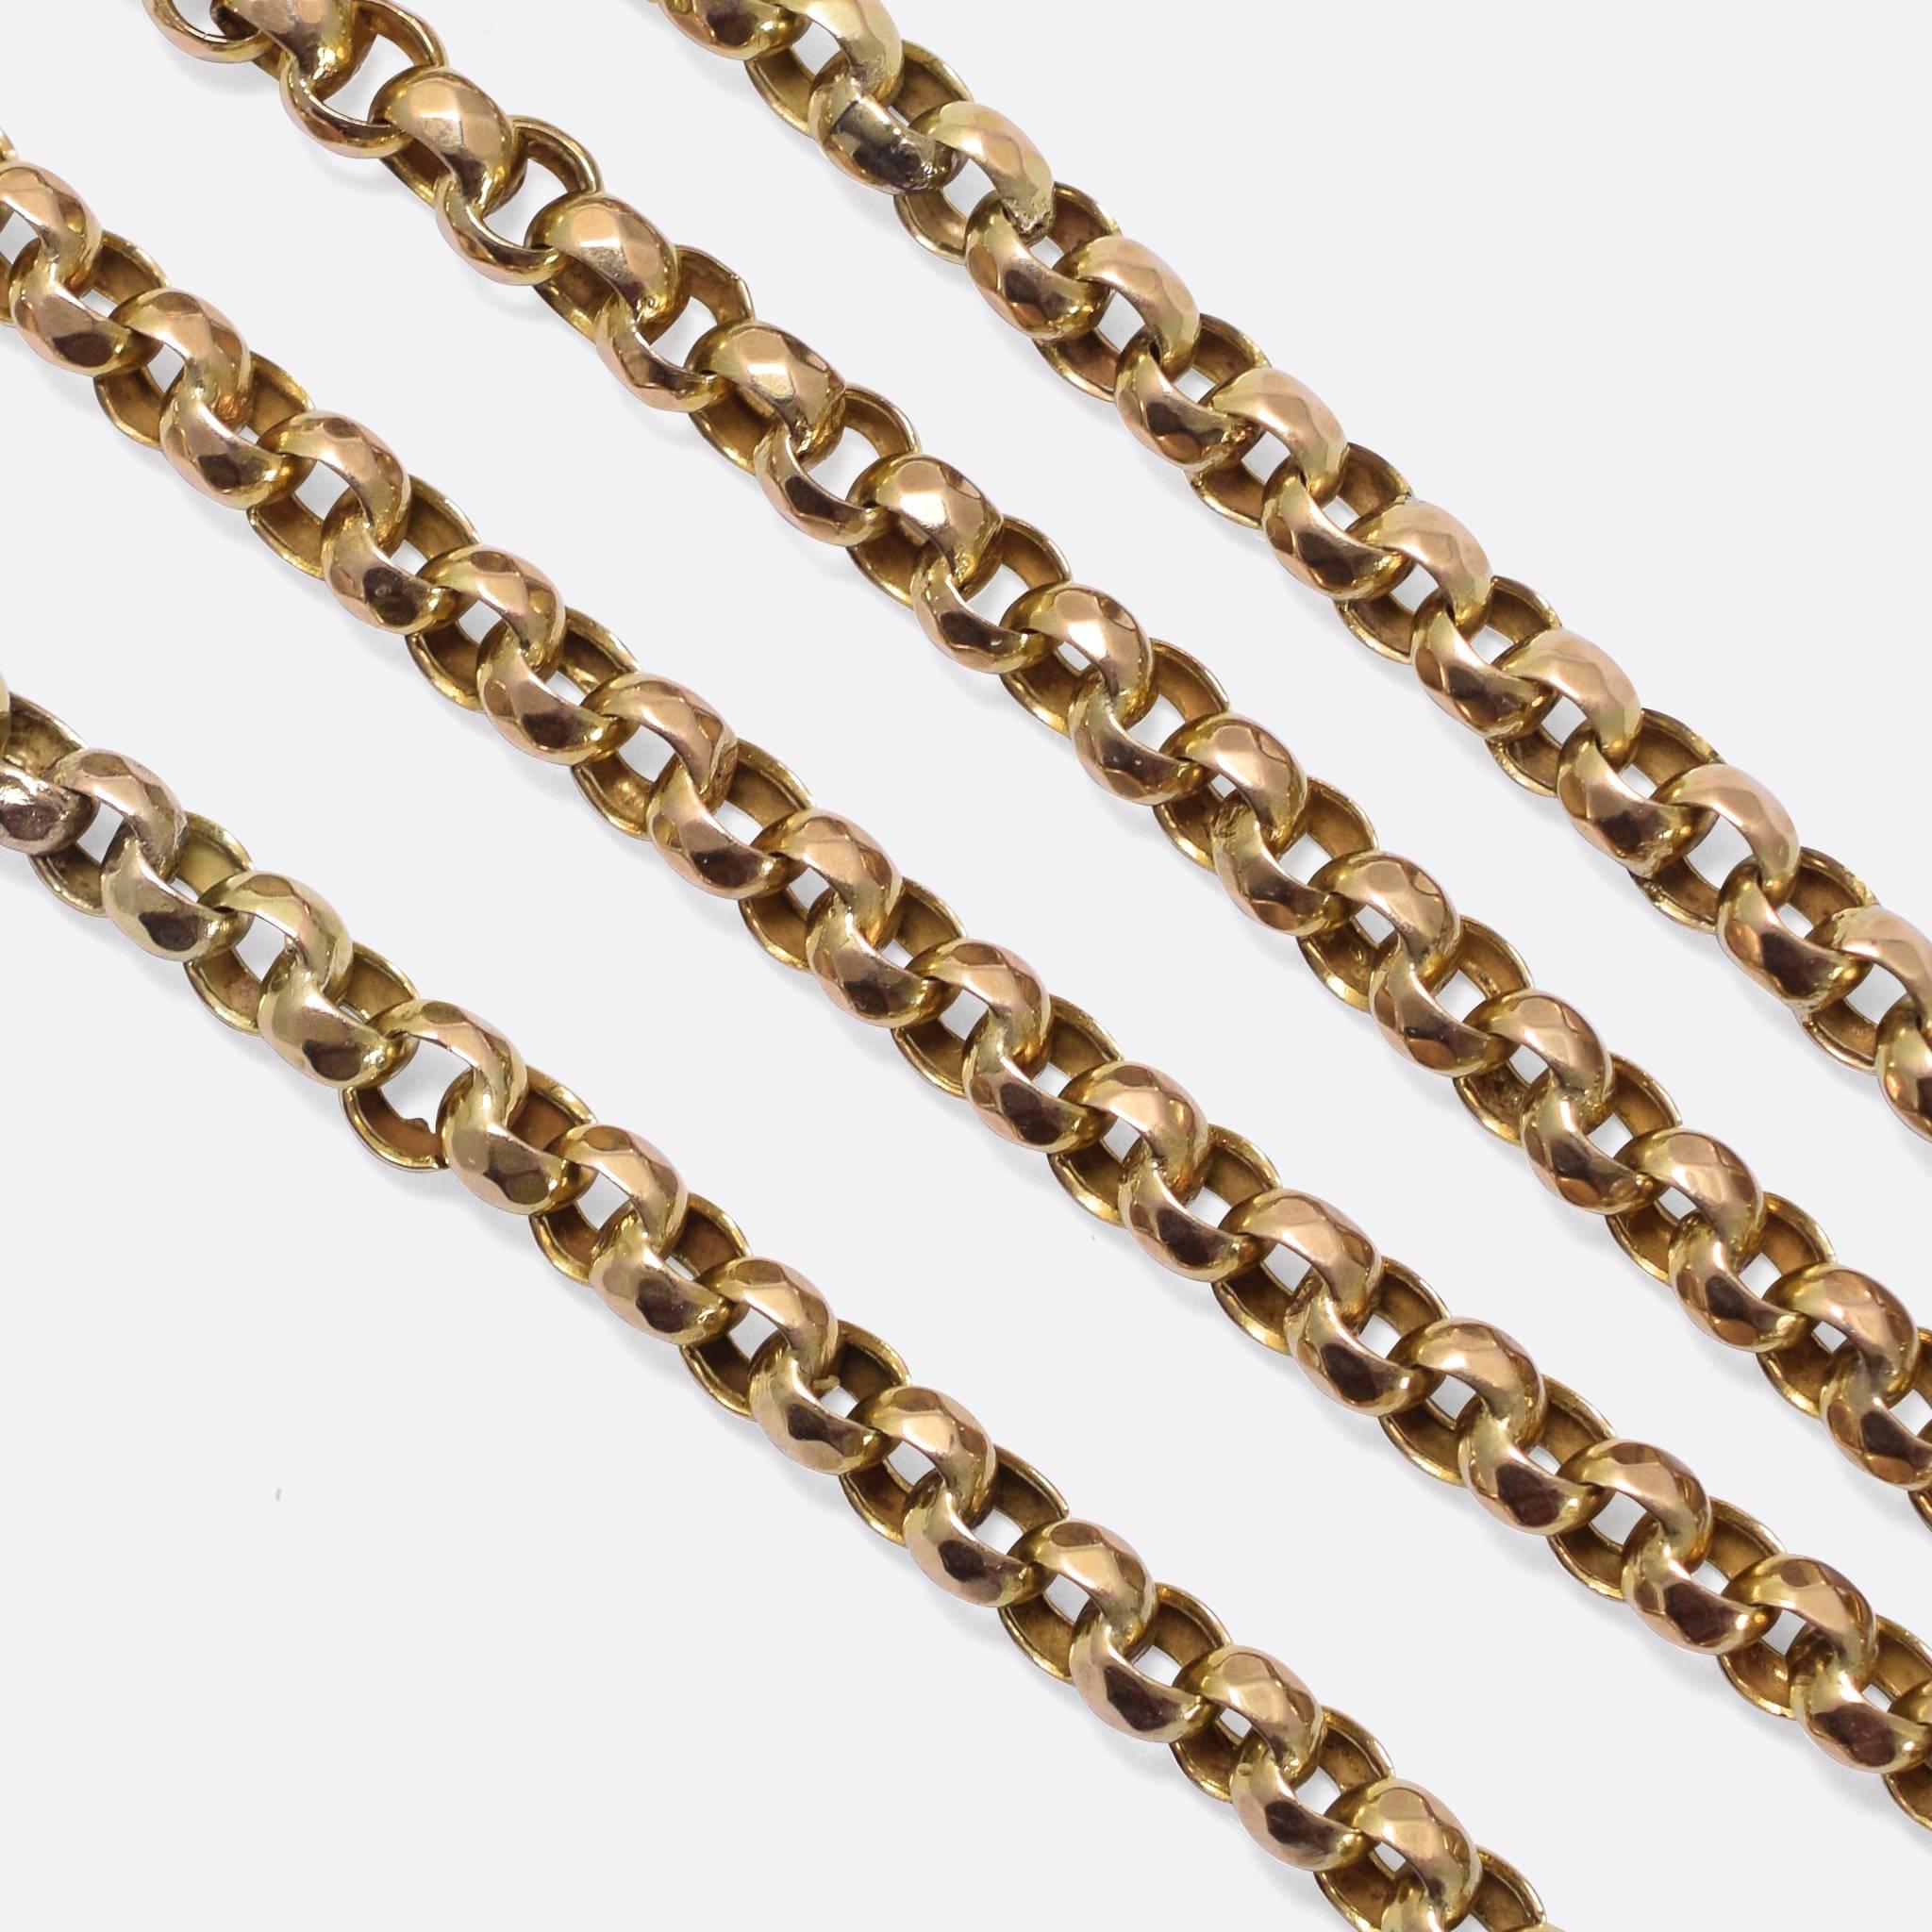 A classic antique half guard chain, modelled in 9k yellow gold with faceted belcher links. The piece is in excellent condition and measures 32 inches in length; it closes securely with a swivel clasp.

MEASUREMENTS
Length: 32 inches - Individual